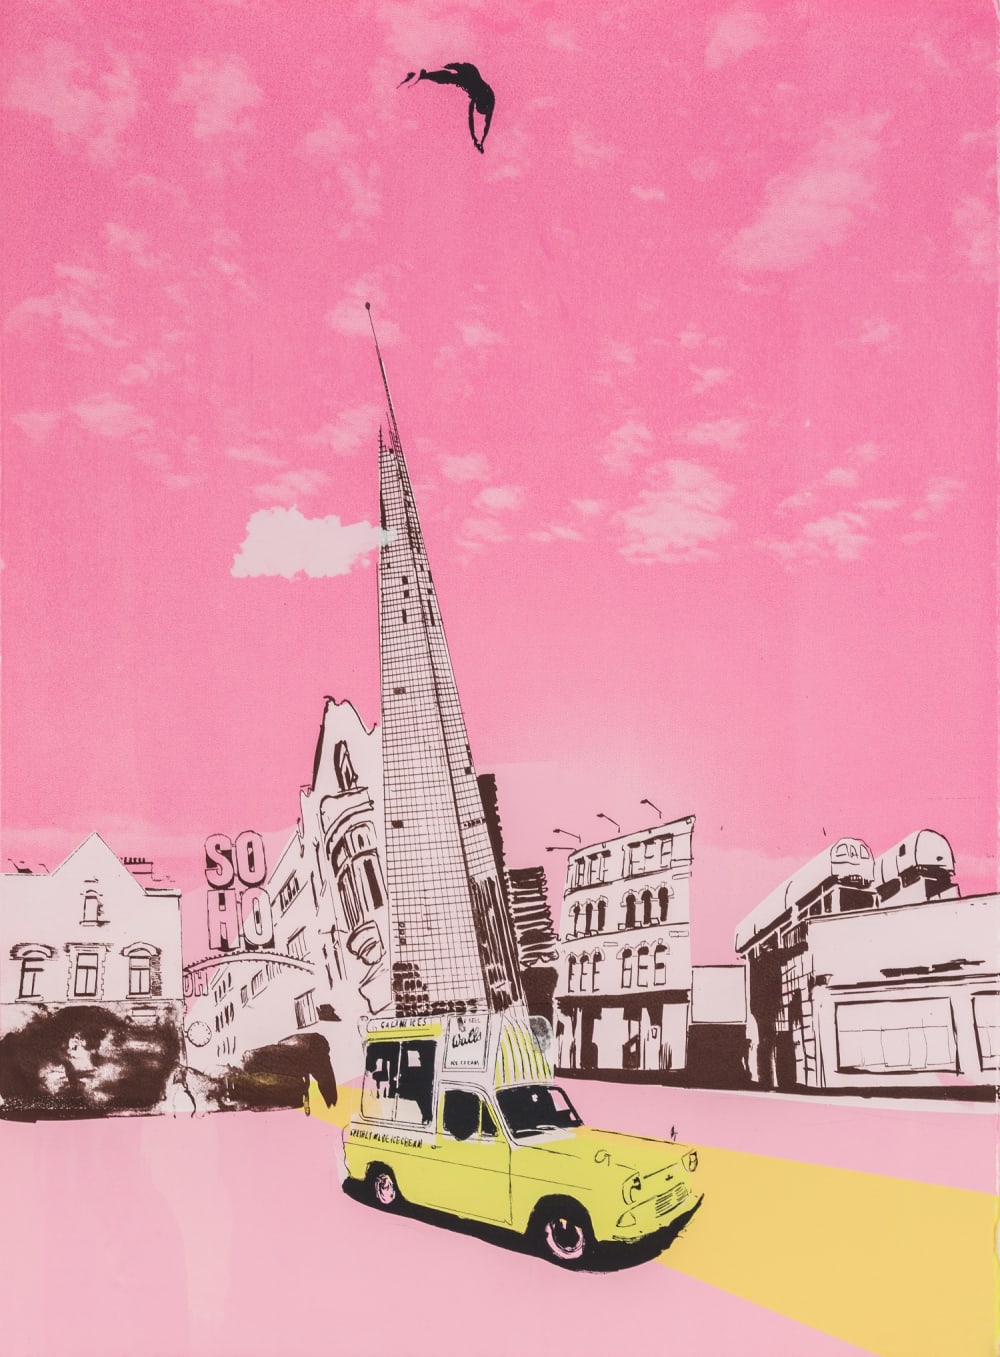 Anna Marrow screenprint of London in pink with yellow cab